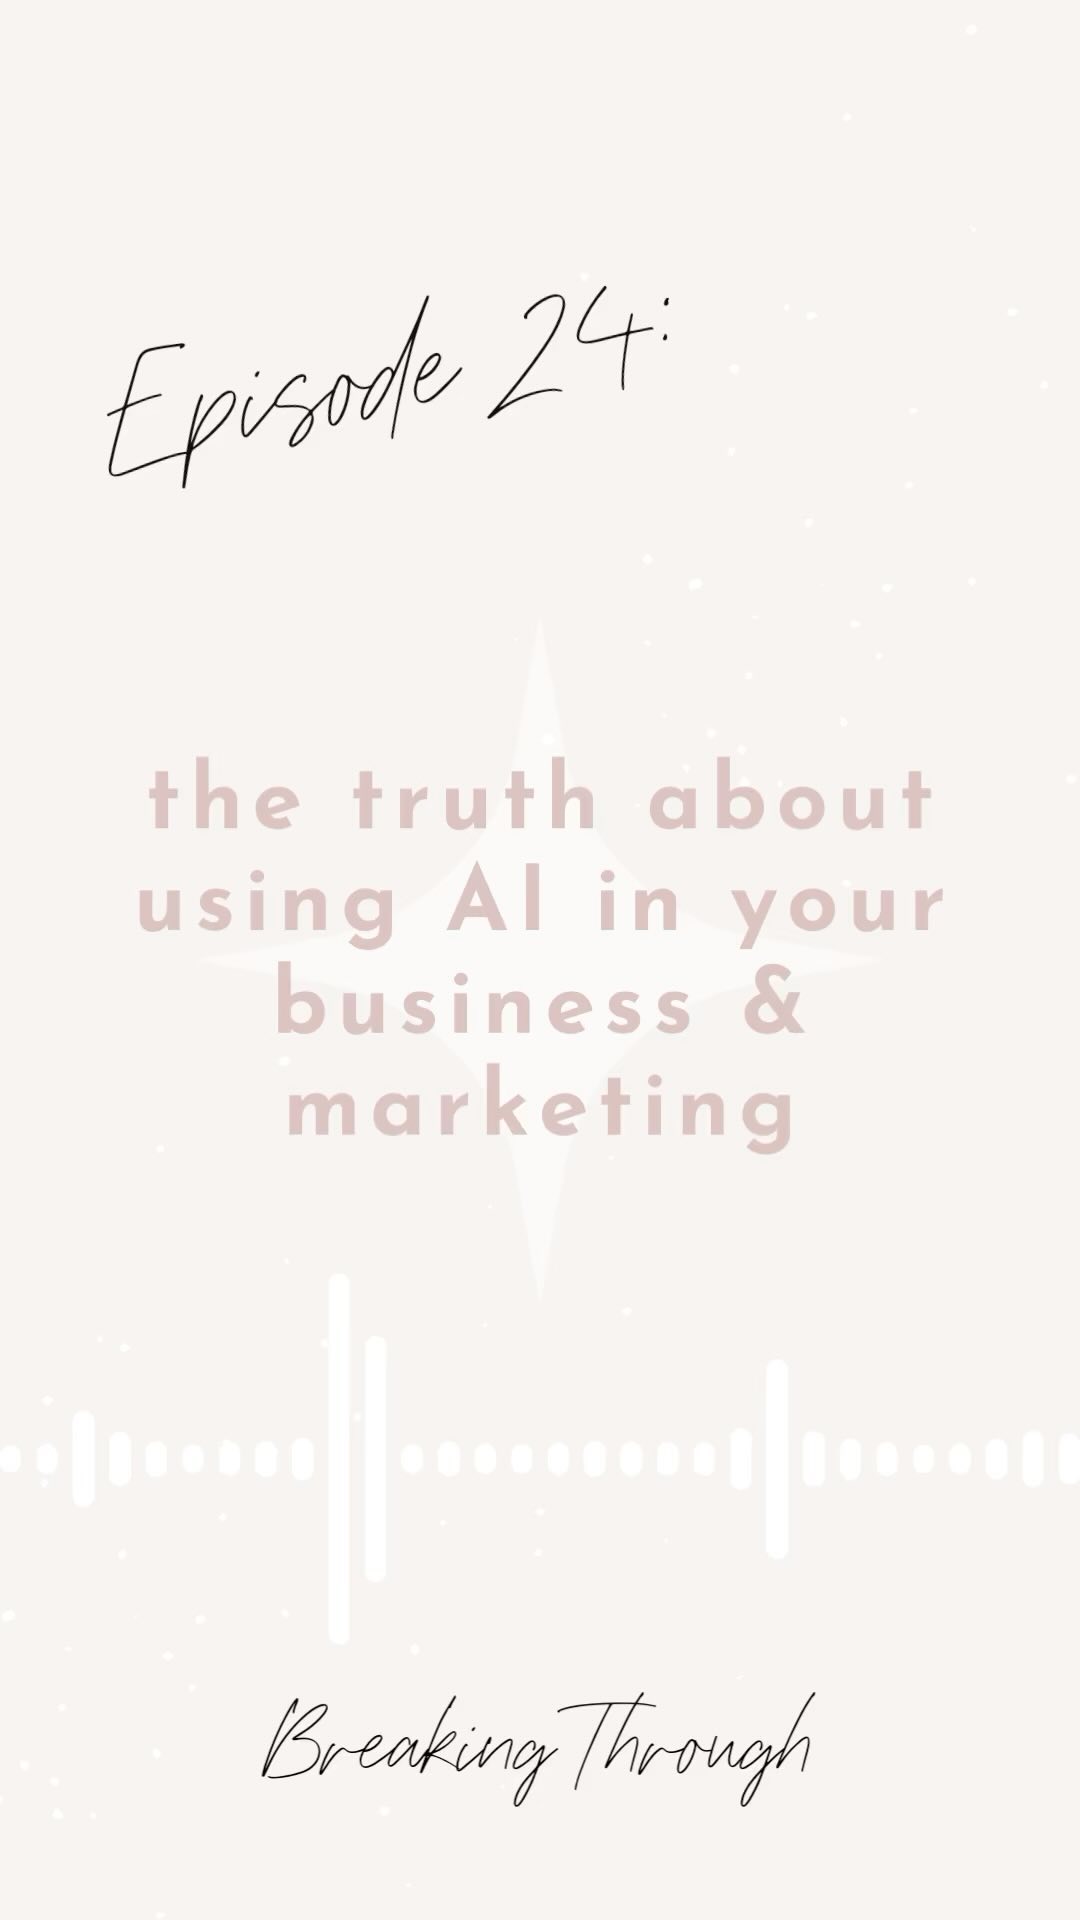 Empower your marketing game with AI! 🚀✨ 
Listen in to our captivating new podcast episode, where we delve into the dynamic world of artificial intelligence in marketing. Let’s dive deep into overcoming any hesitations and unlocking the incredible potential of AI. Together, we’ll discover how to harness its power and revolutionize your strategies. Get ready to conquer new horizons! 🔥🎙️

(And in case you were wondering, yes, we used AI to write this caption 😉)

 #WomenInMarketing #AIRevolution #PodcastEmpowerment